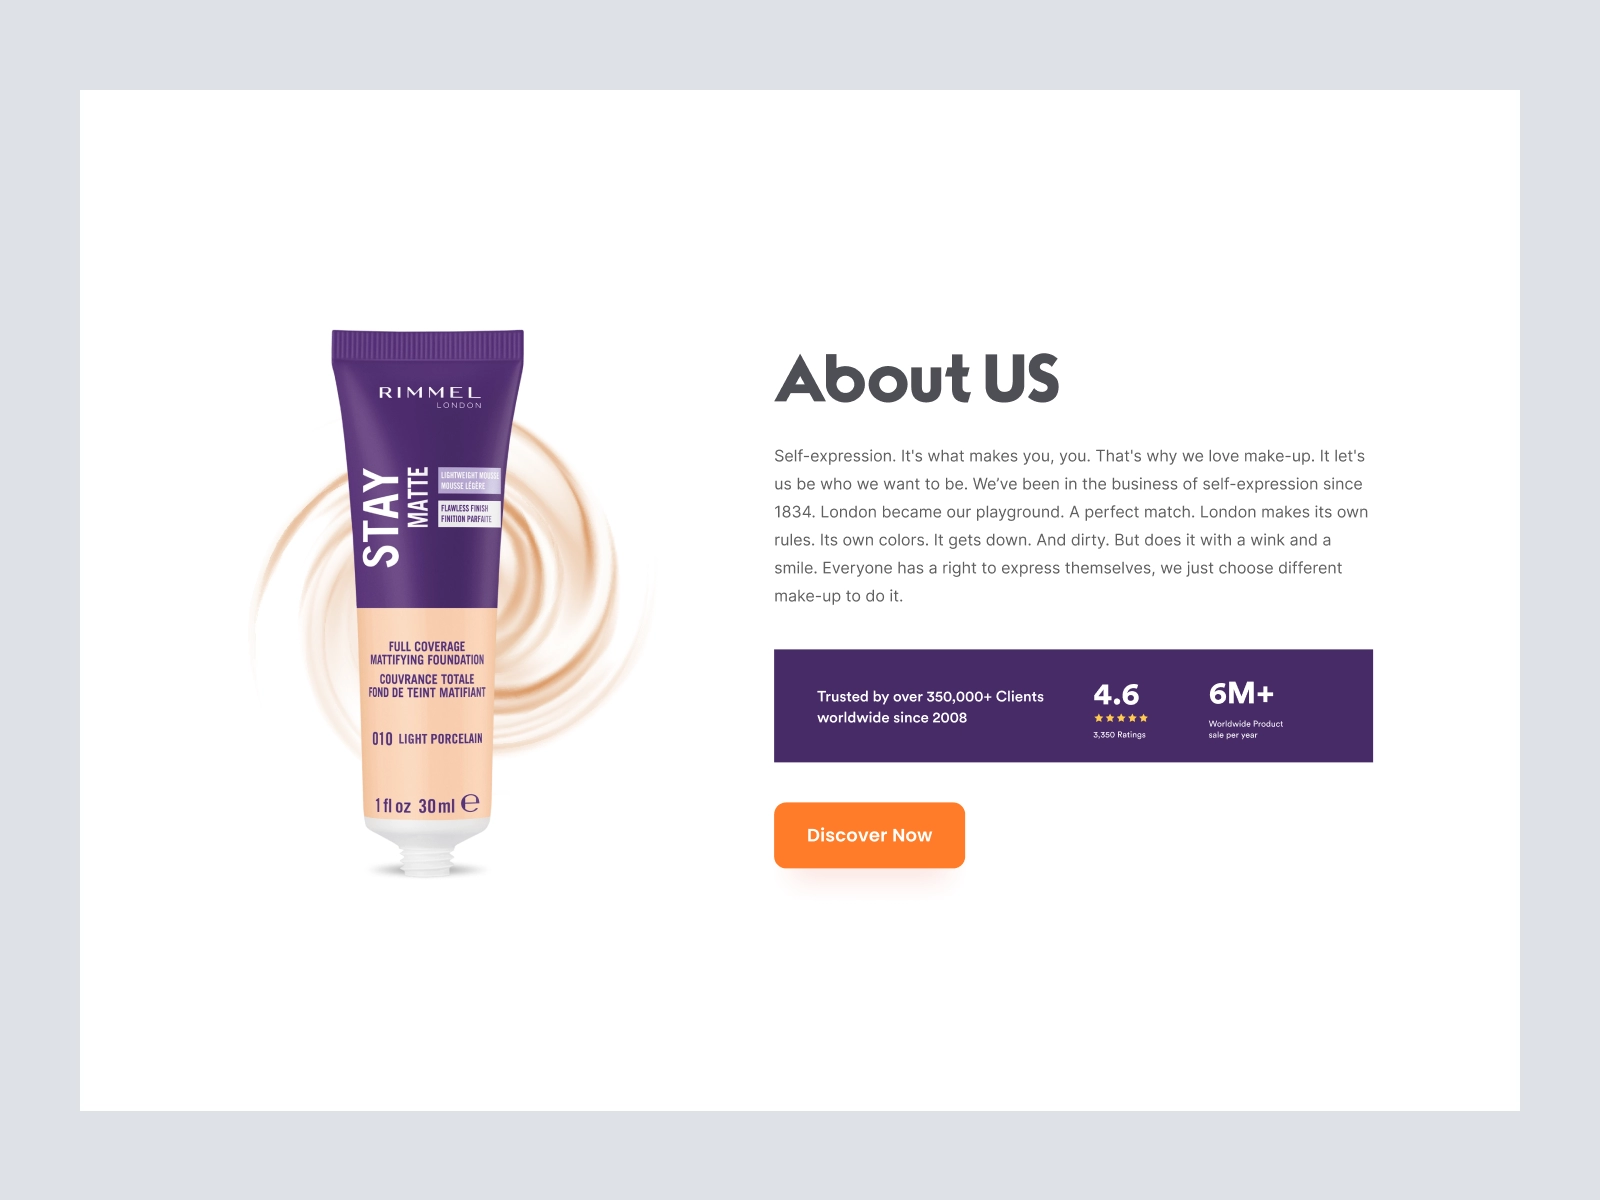 RIMMEL - Shopify Store Design for Cosmetics Products for Adobe XD - screen 4